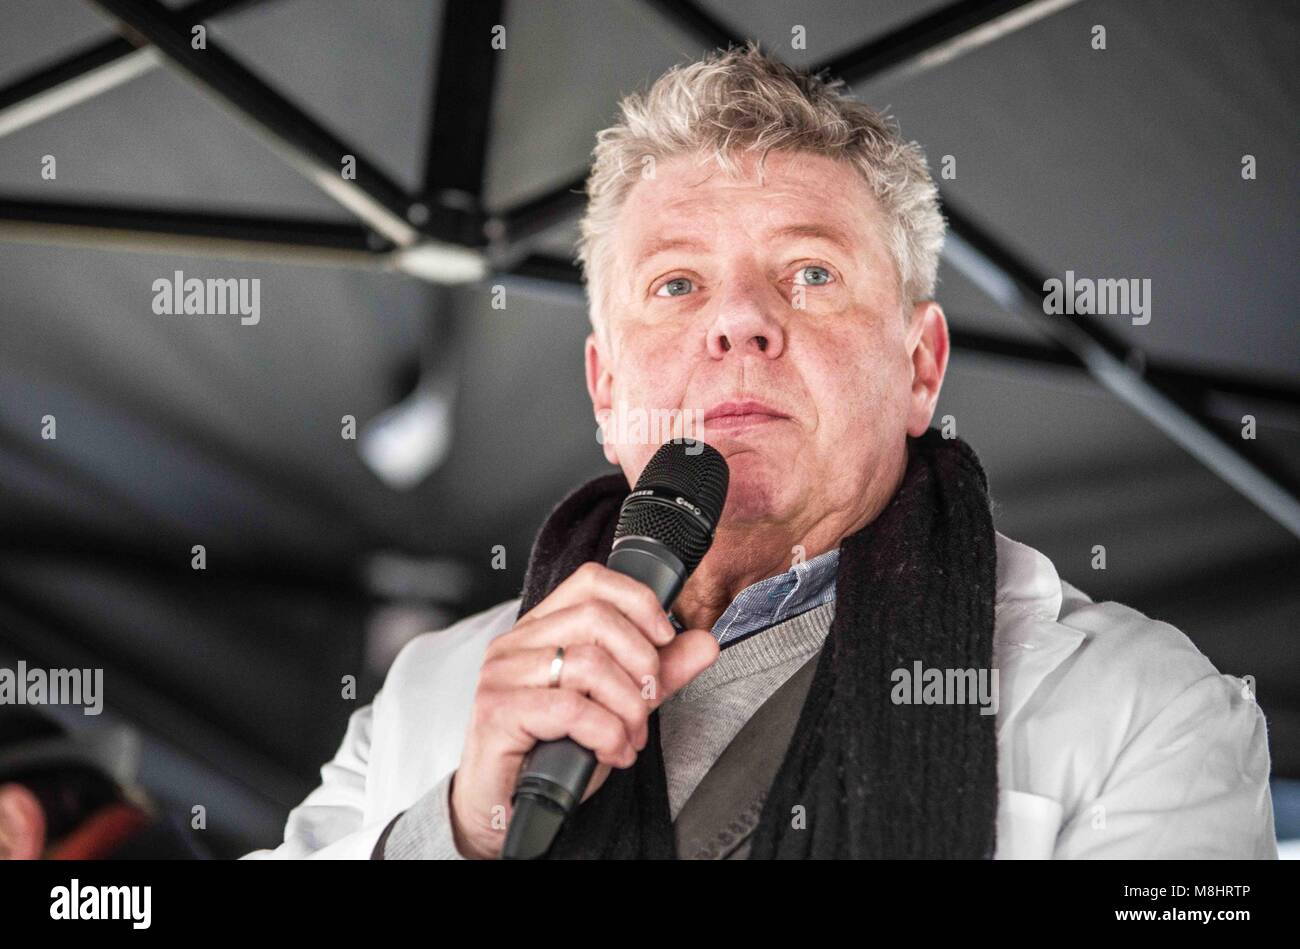 Munich, Bavaria, Germany. 17th Mar, 2018. Munich mayor Dieter Reiter. Protesting against the arrival of Pegida Dresden's Lutz Bachmann and Sigfried Daebritz in Munich, no less than three demonstrations were organized by the city, including a Muenchen ist Bunt and Bellevue di Monaco protest at Max Joseph Platz. At this demonstration, choirs were in attendance, along with celebrities, politicians, and other prominent Muenchners dressed as doctors in order to tell Pegida that they will help them go back to Dresden. Participants: Syrischer Friedenschor, MÃ¼nchner Kneipenchor, Der Chor der Sc Stock Photo